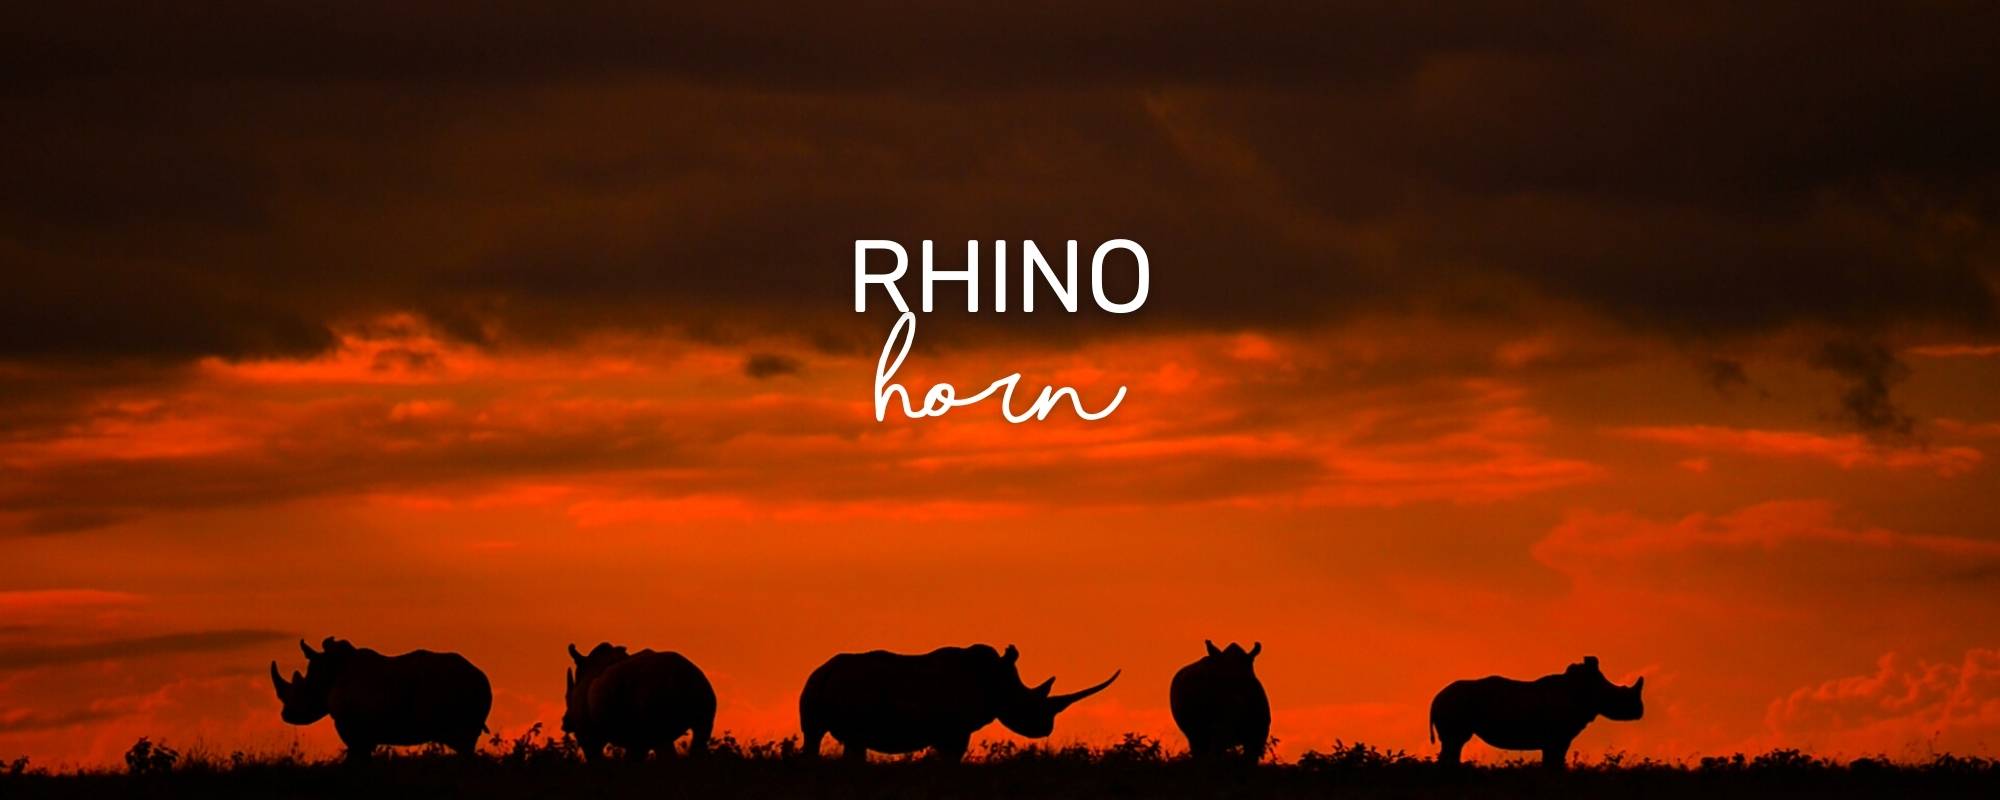 What about rhino horn?